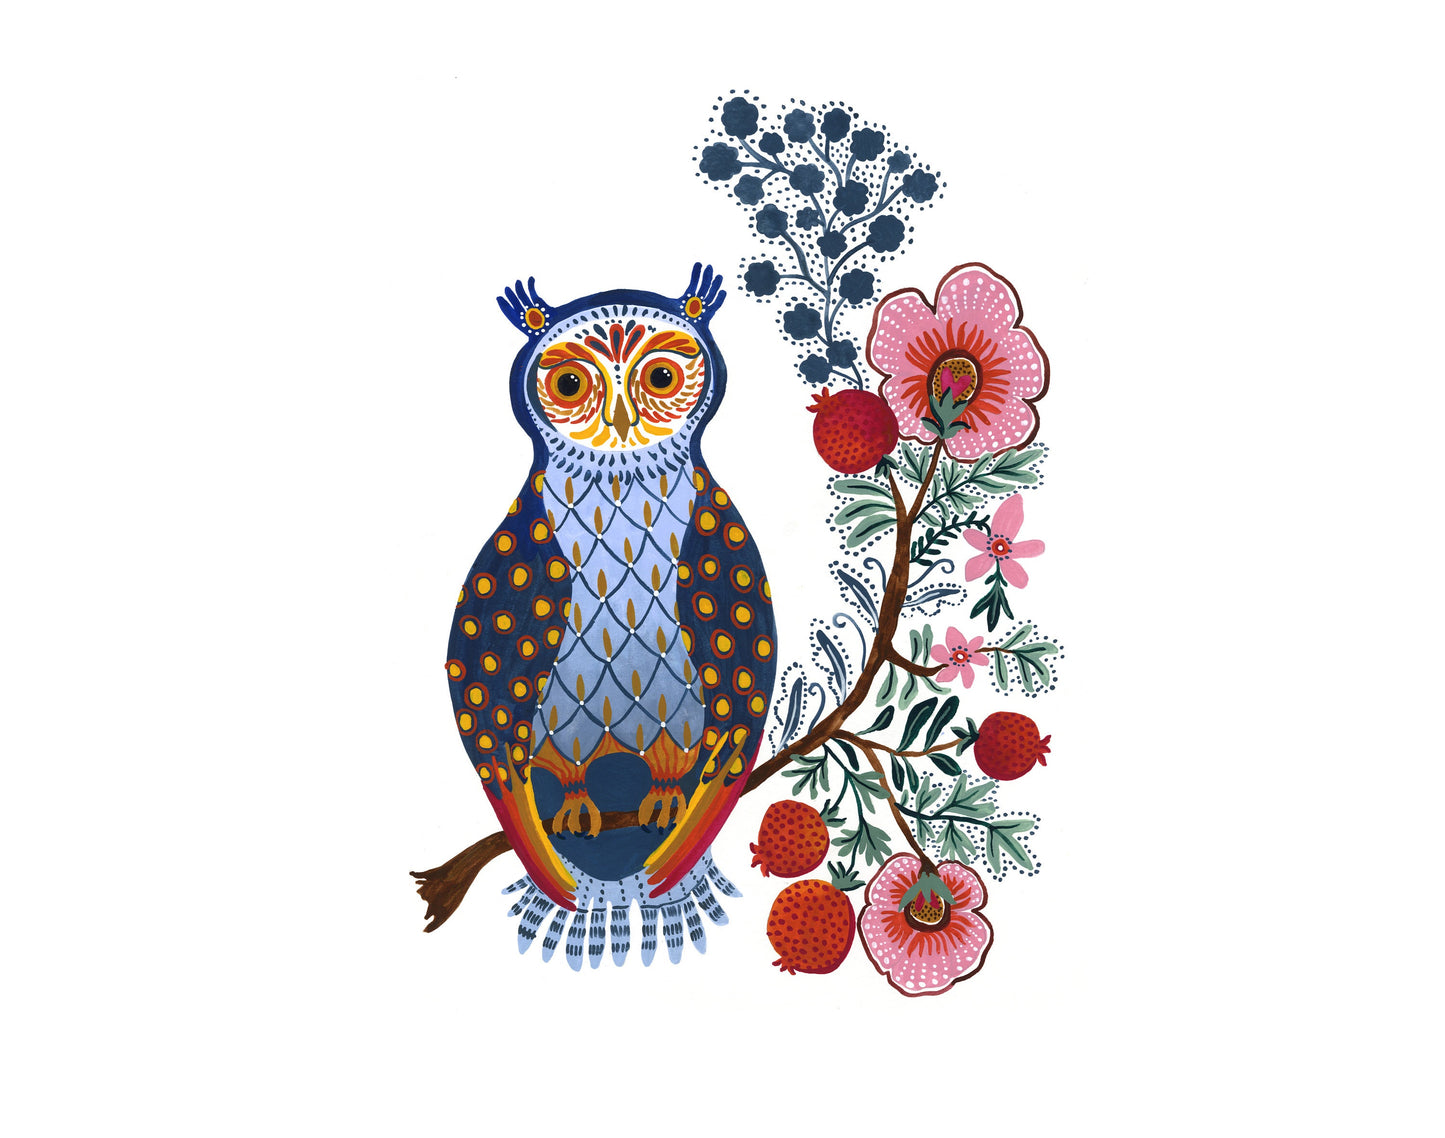 Folk Owl and Decorative Floral Tree  Art Print by Corinne Lent